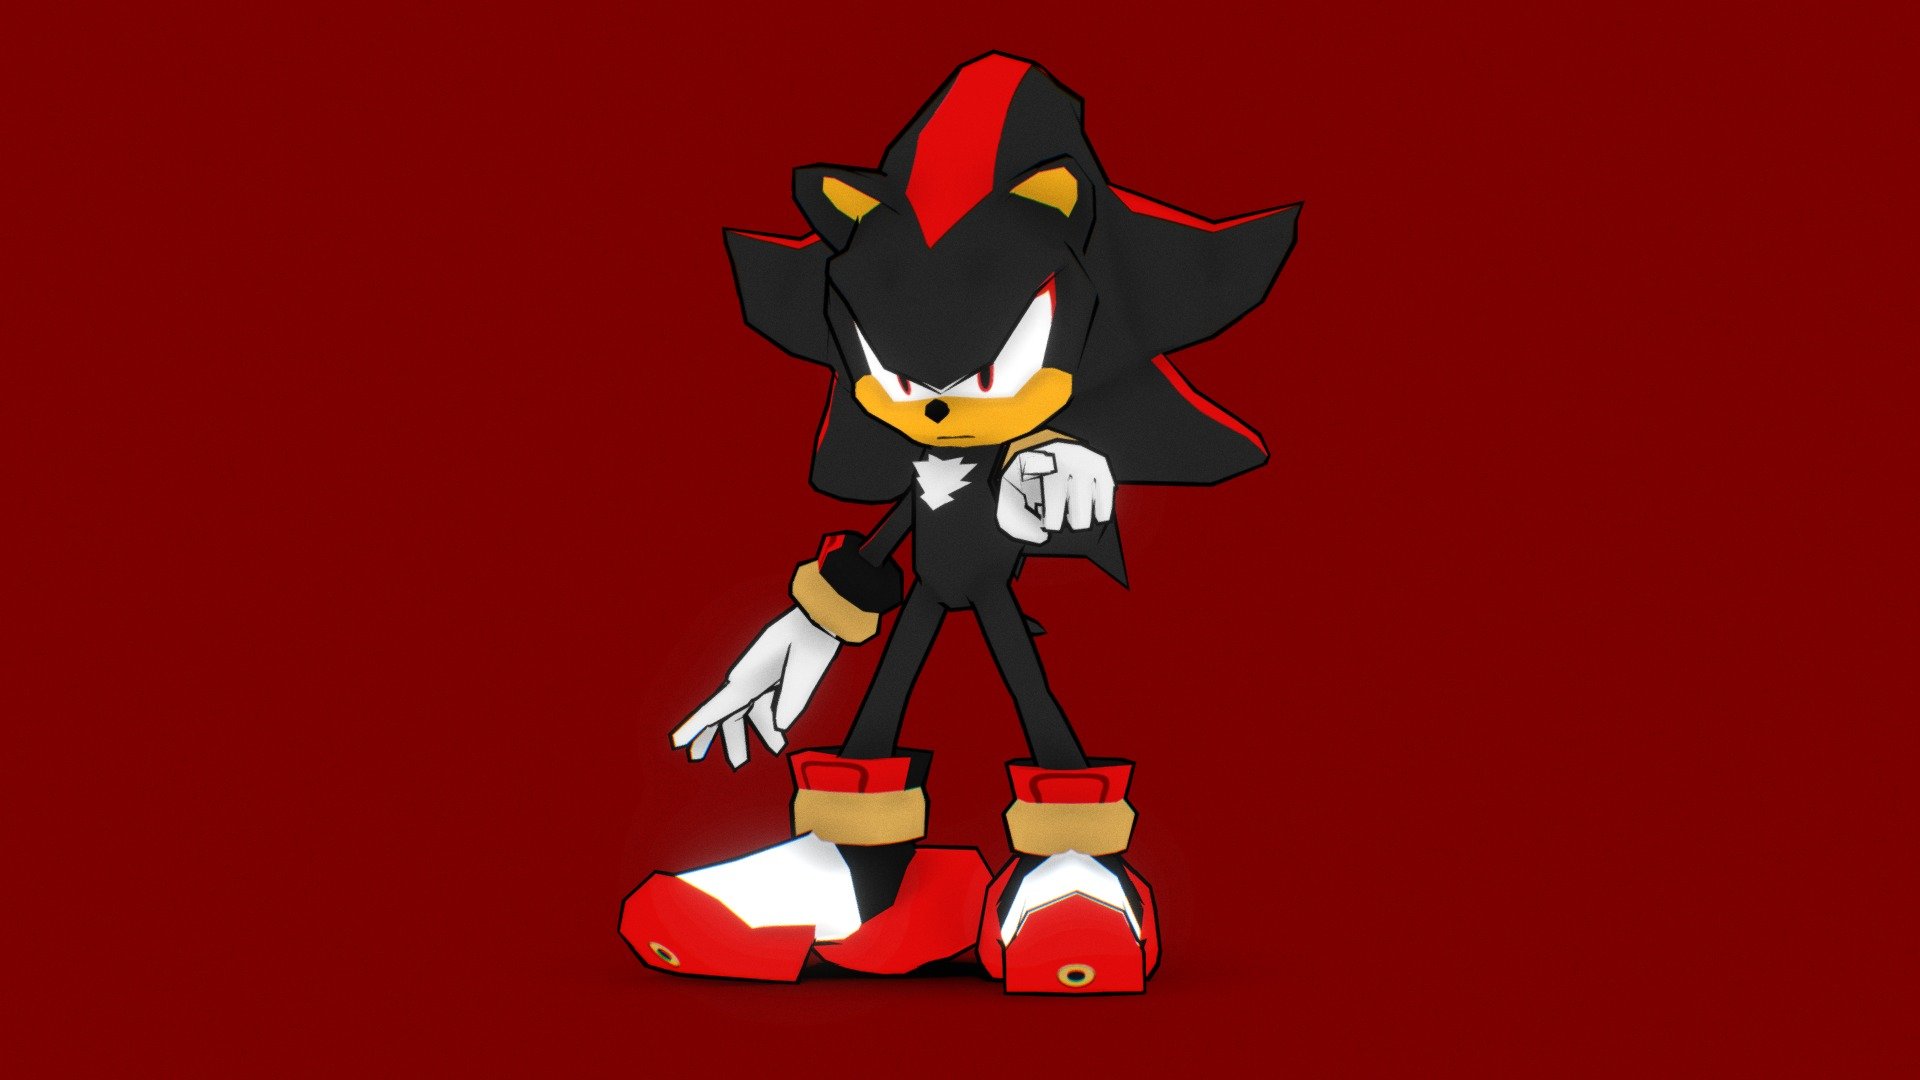 Shadow The Hedgehog from the &lsquo;Sonic' series - Shadow The Hedgehog - 3D model by Pedro dos Santos (@dropes) 3d model